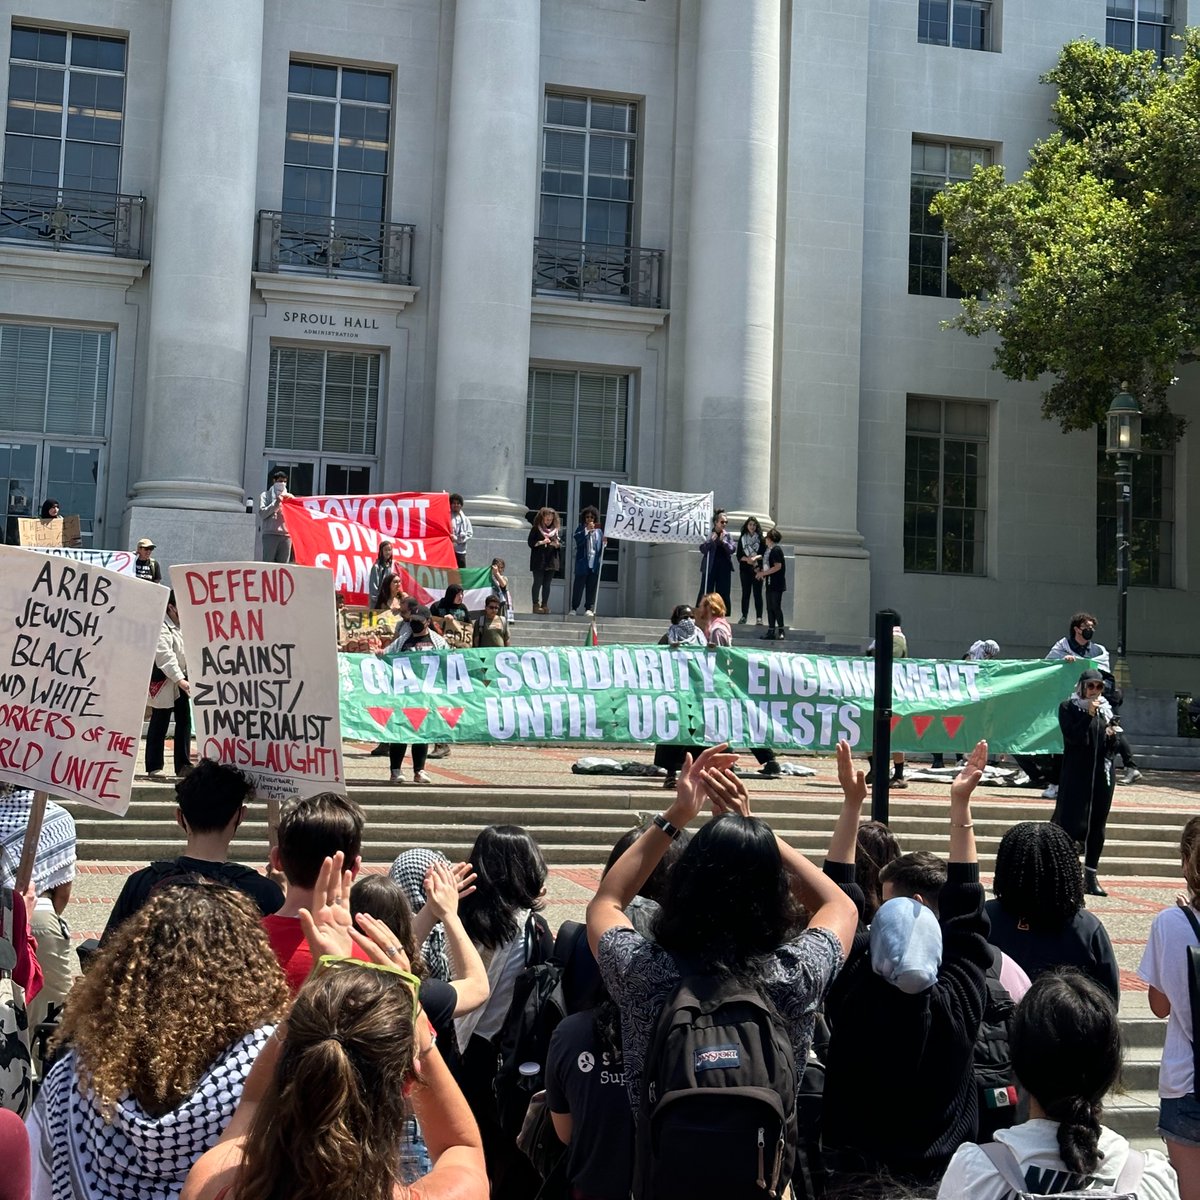 UC Berkeley students have begun their campus solidarity encampment with the demand that the University of California divest from Israel